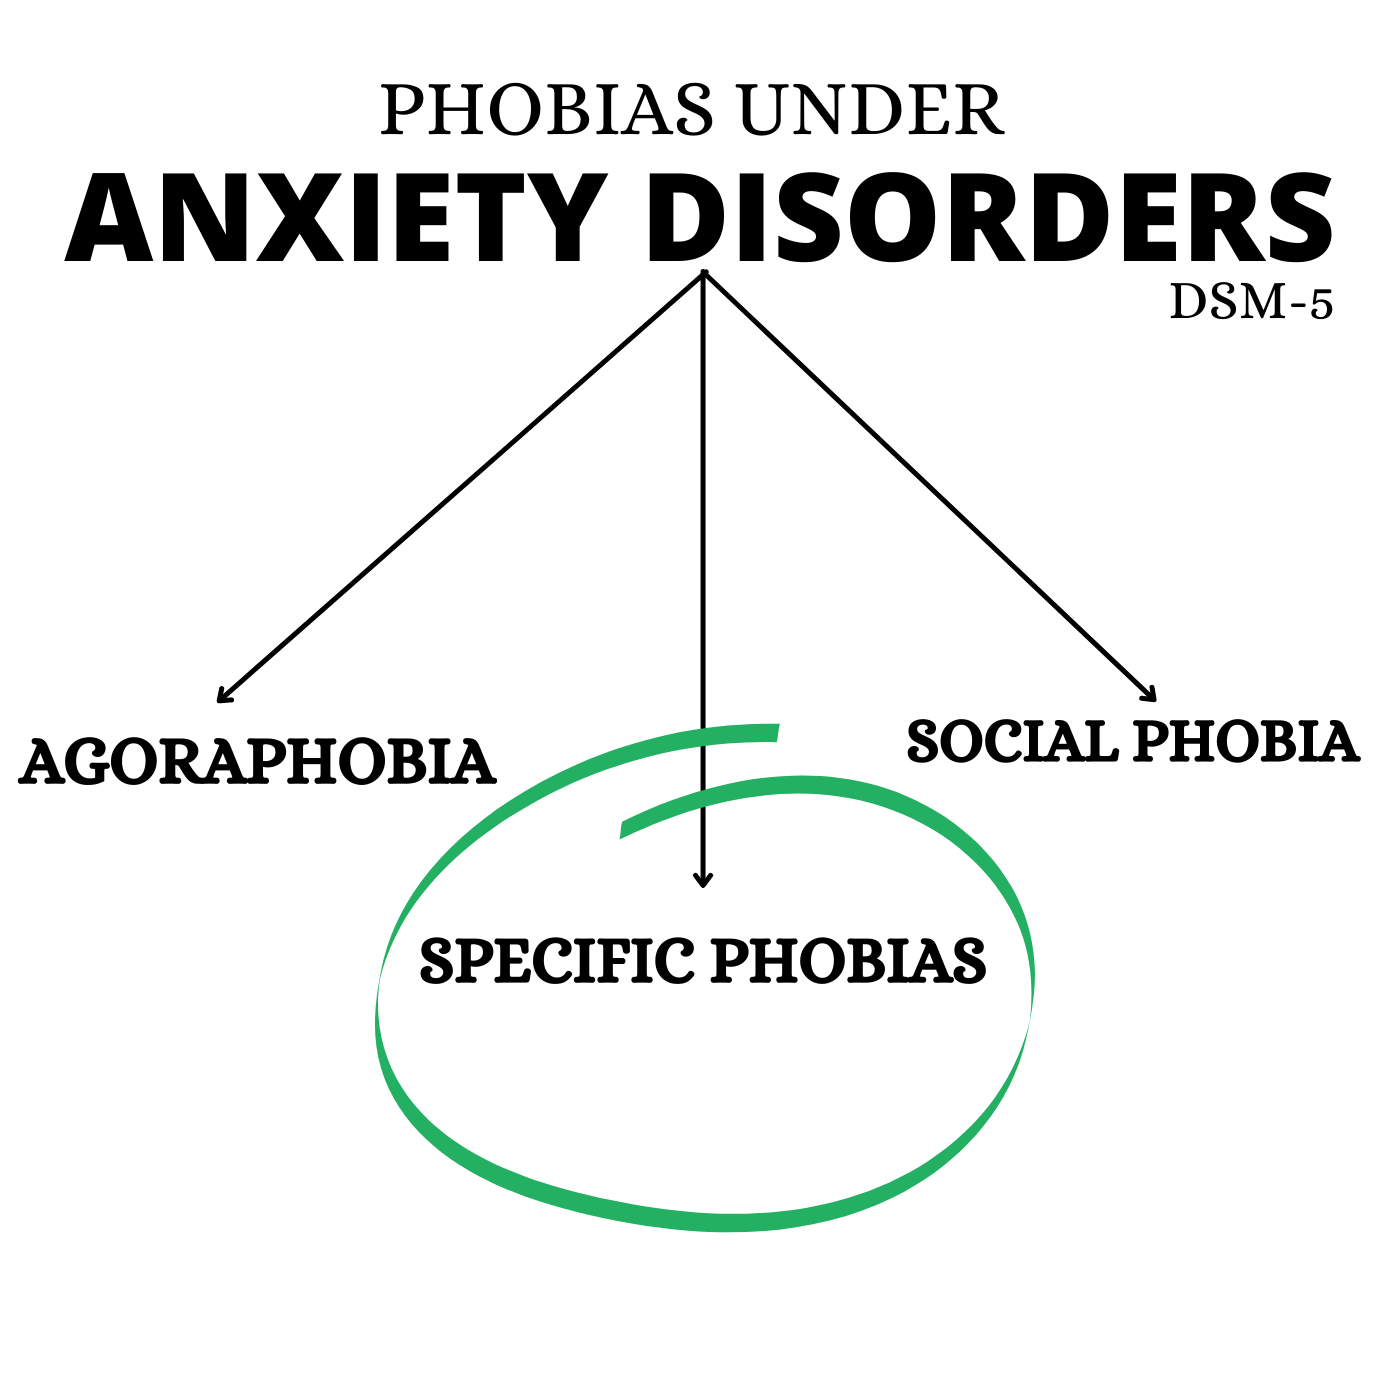 Specific phobia definitions, types, causes, diagnosis, treatments, self help, DSM-5.